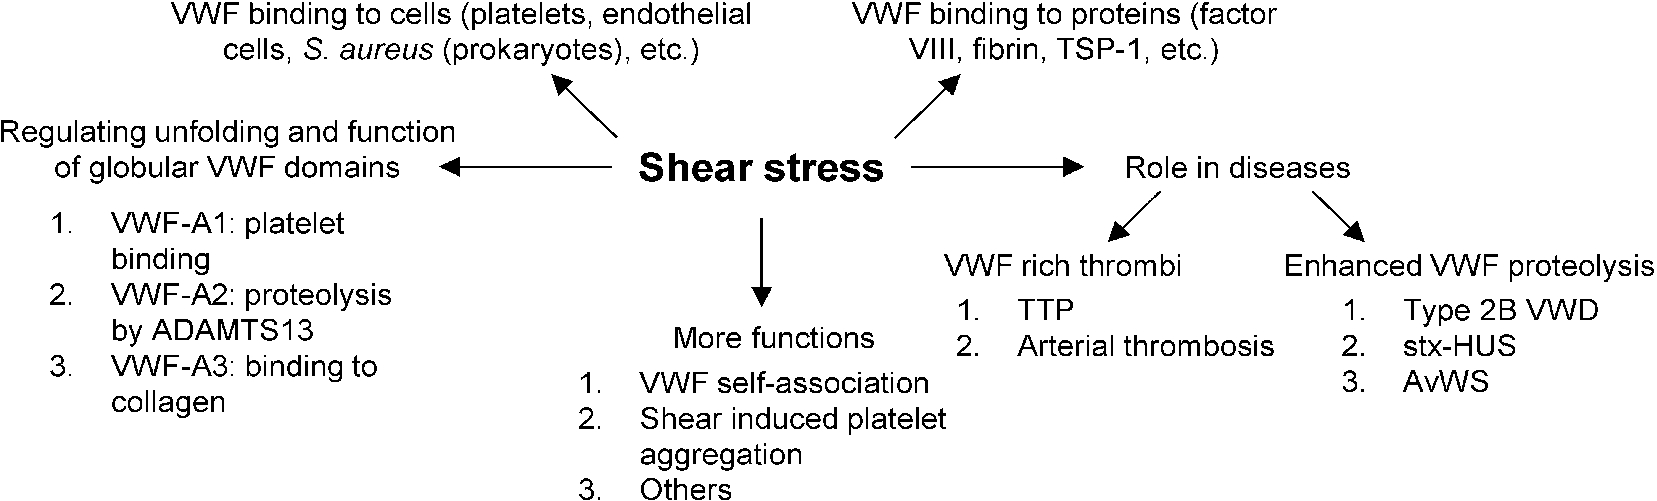 Role of shear stress in VWF related biology. Shear stress exerts force on multimeric VWF and causes structural changes in globular A1, A2 and A3 domains, allowing them to carry out their respective functions. Shear stress also regulates the binding of VWF to various plasma proteins and surface receptors on platelets, endothelial cells and even prokaryotic cells in circulation. In a number of different blood disorders, high shear stress either causes enhanced VWF proteolysis (bleeding disorders) or the formation of VWF-rich thrombi (thrombotic disorders). Finally, shear stress is important for VWF and platelet aggregation in physiology. Abbreviations: Shiga-toxin-hemolytic uremic syndrome (stx-HUS), thrombotic thrombocytopenic purpura (TTP), acquired von Willebrand syndrome (AvWS).